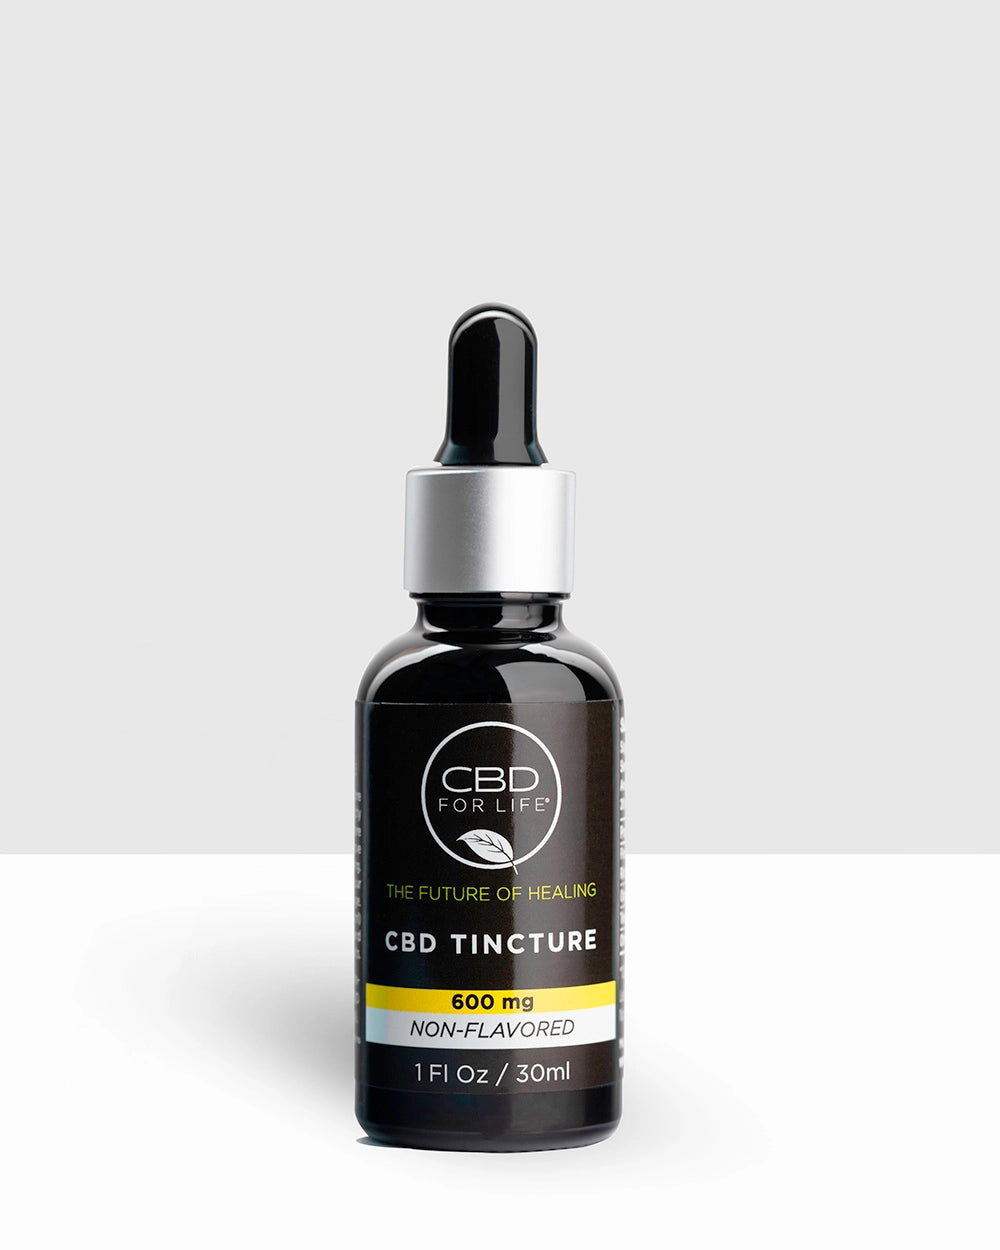 Crafted with the highest standards from organically farmed, Colorado hemp, we blend pure CBD isolate with phytonutrient-rich CBD oil to create a bio-available tincture that delivers immediate and lasting benefits. CBD Isolate provides a fast release, while our 600 mg CBD oil non flavored is sustained release for a long lasting effect. The addition of organic, fractionated coconut oil provides increased absorption and more importantly, a smooth, easy-to-ingest taste.